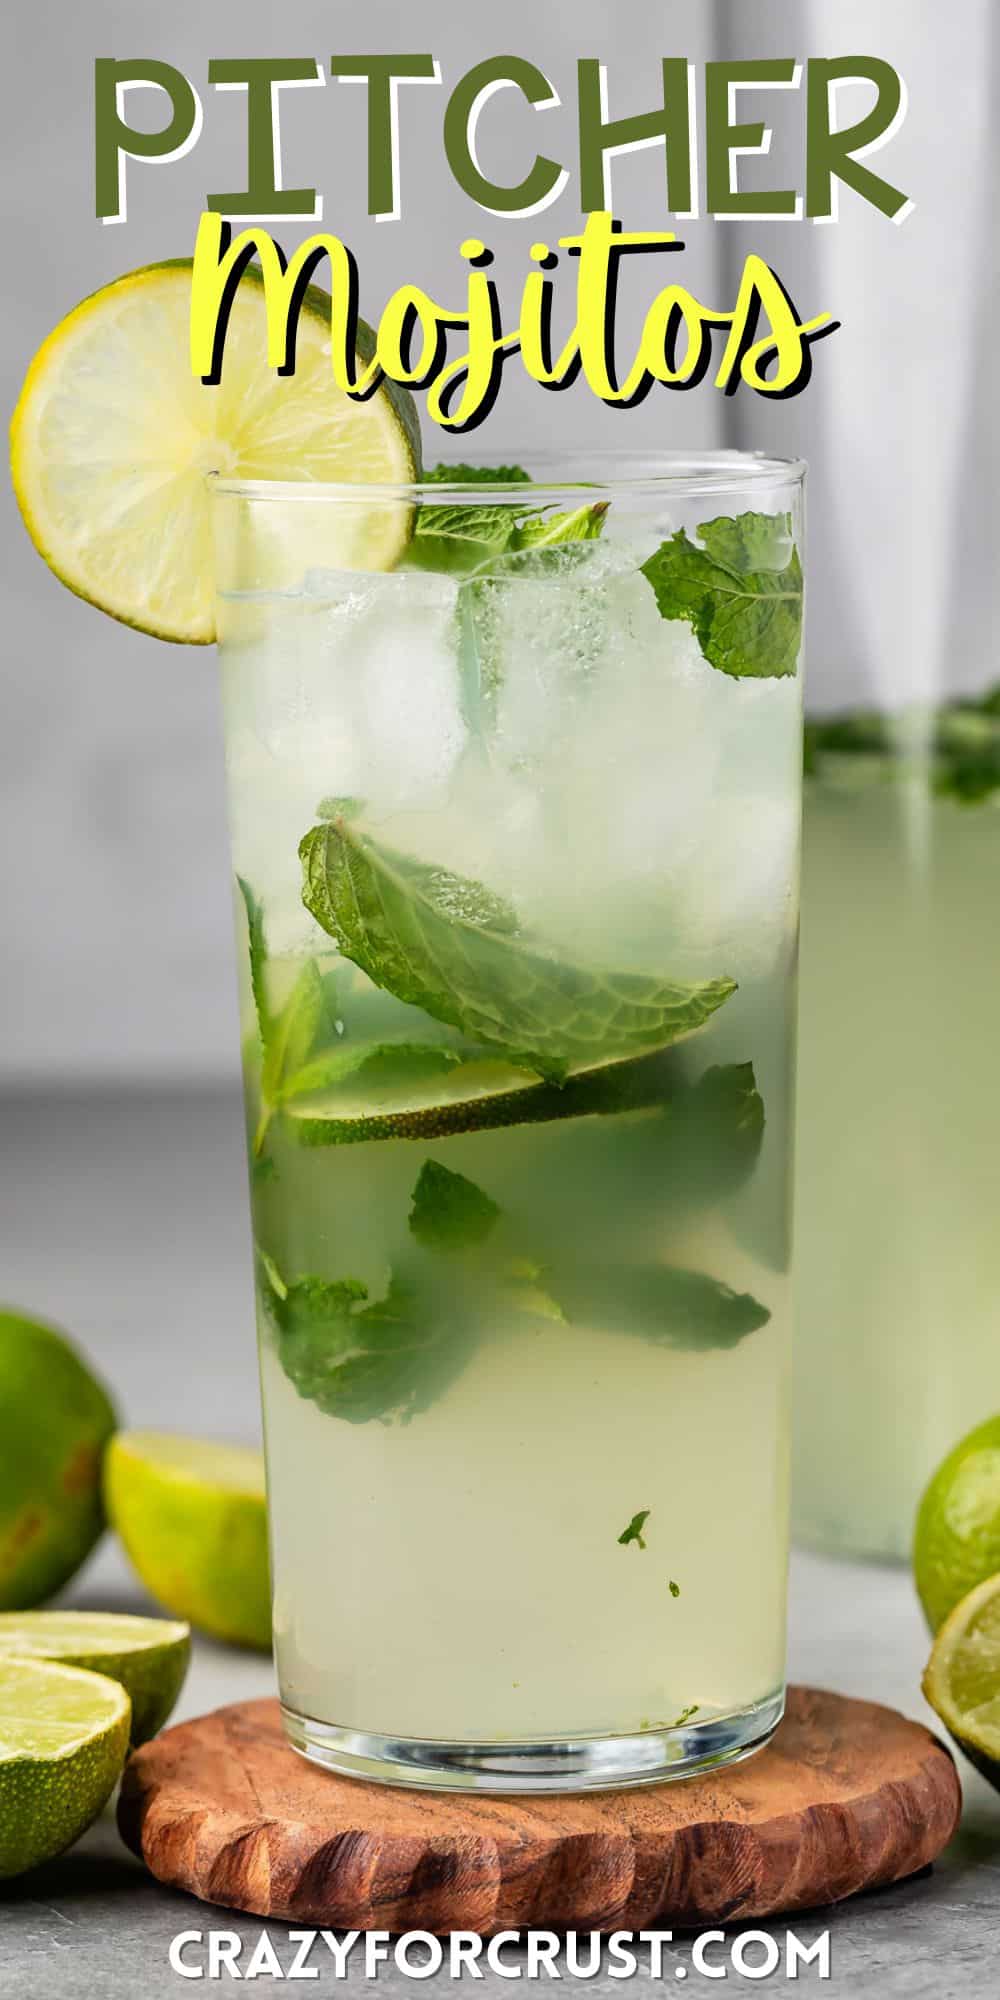 mojito in a tall clear glass with sliced limes in and around the glass with mint with words on the image.